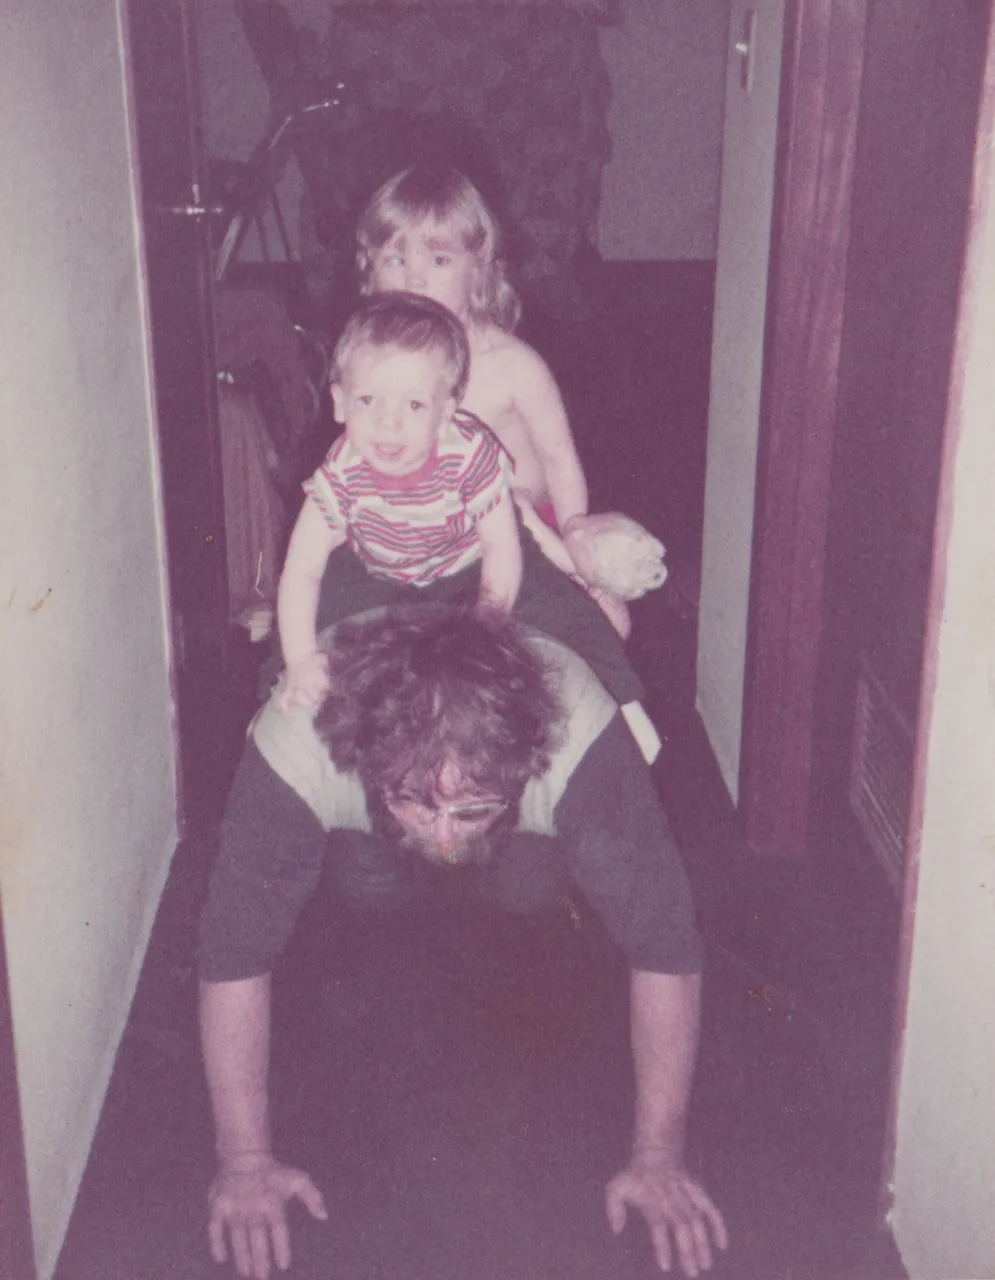 1983 - Horsey Game - Riding Dad - Don, Rick, Katie - probably in Lake Oswego.png